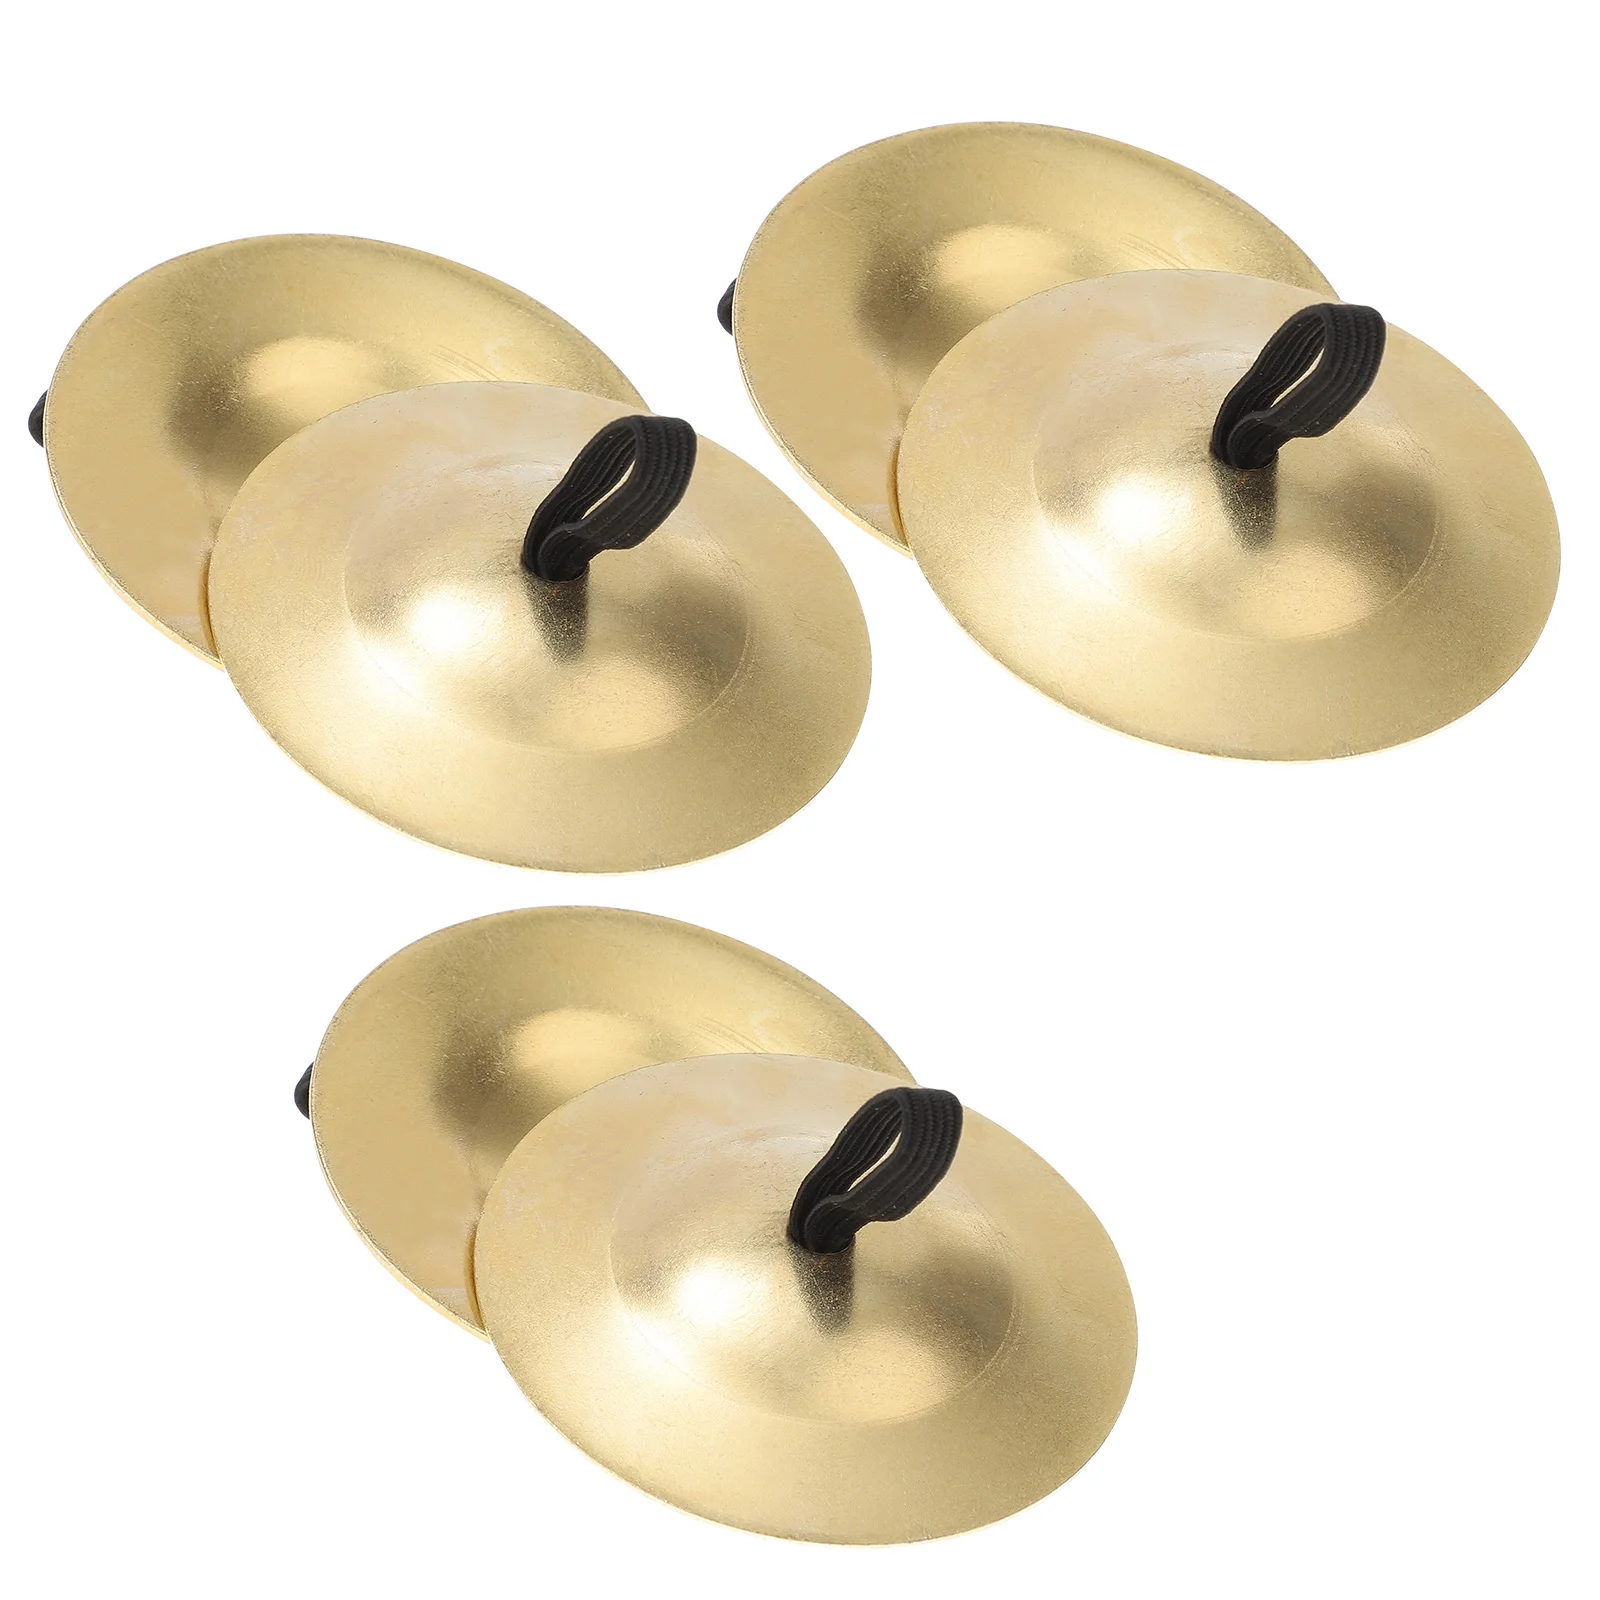 

6Pcs/ 3Pairs Copper Childrens Toyss Belly Dancing Zills Small Golden Cymbals 5.5CM Kids Cymbals Instrument